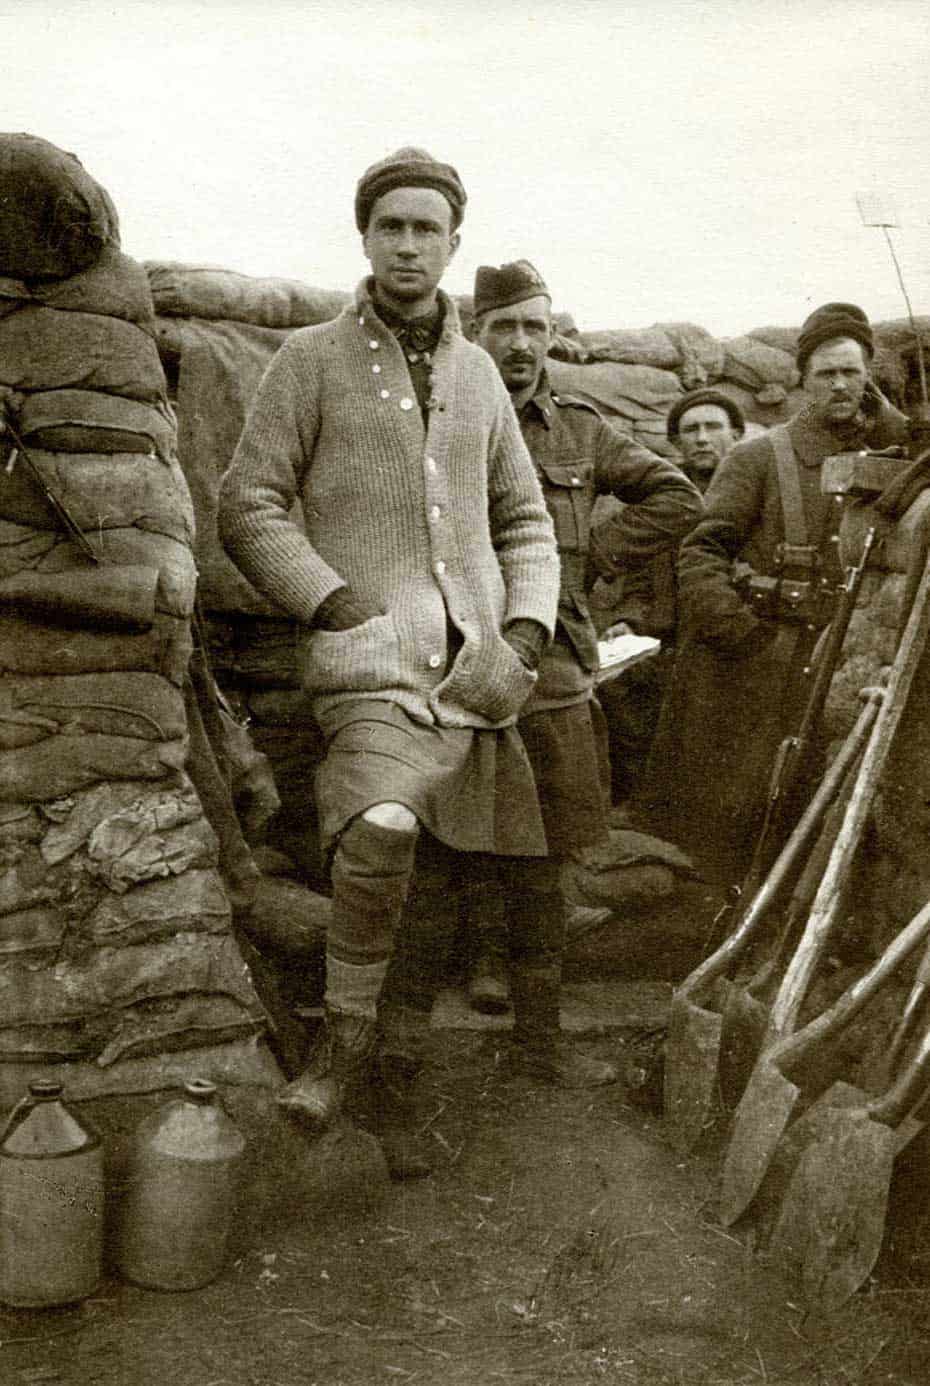 Guy-Drummond-with-his-comrades-in-the-trenches-at-Passchendaele-in-1914.-Archive-photo-McCord-Museum.jpg